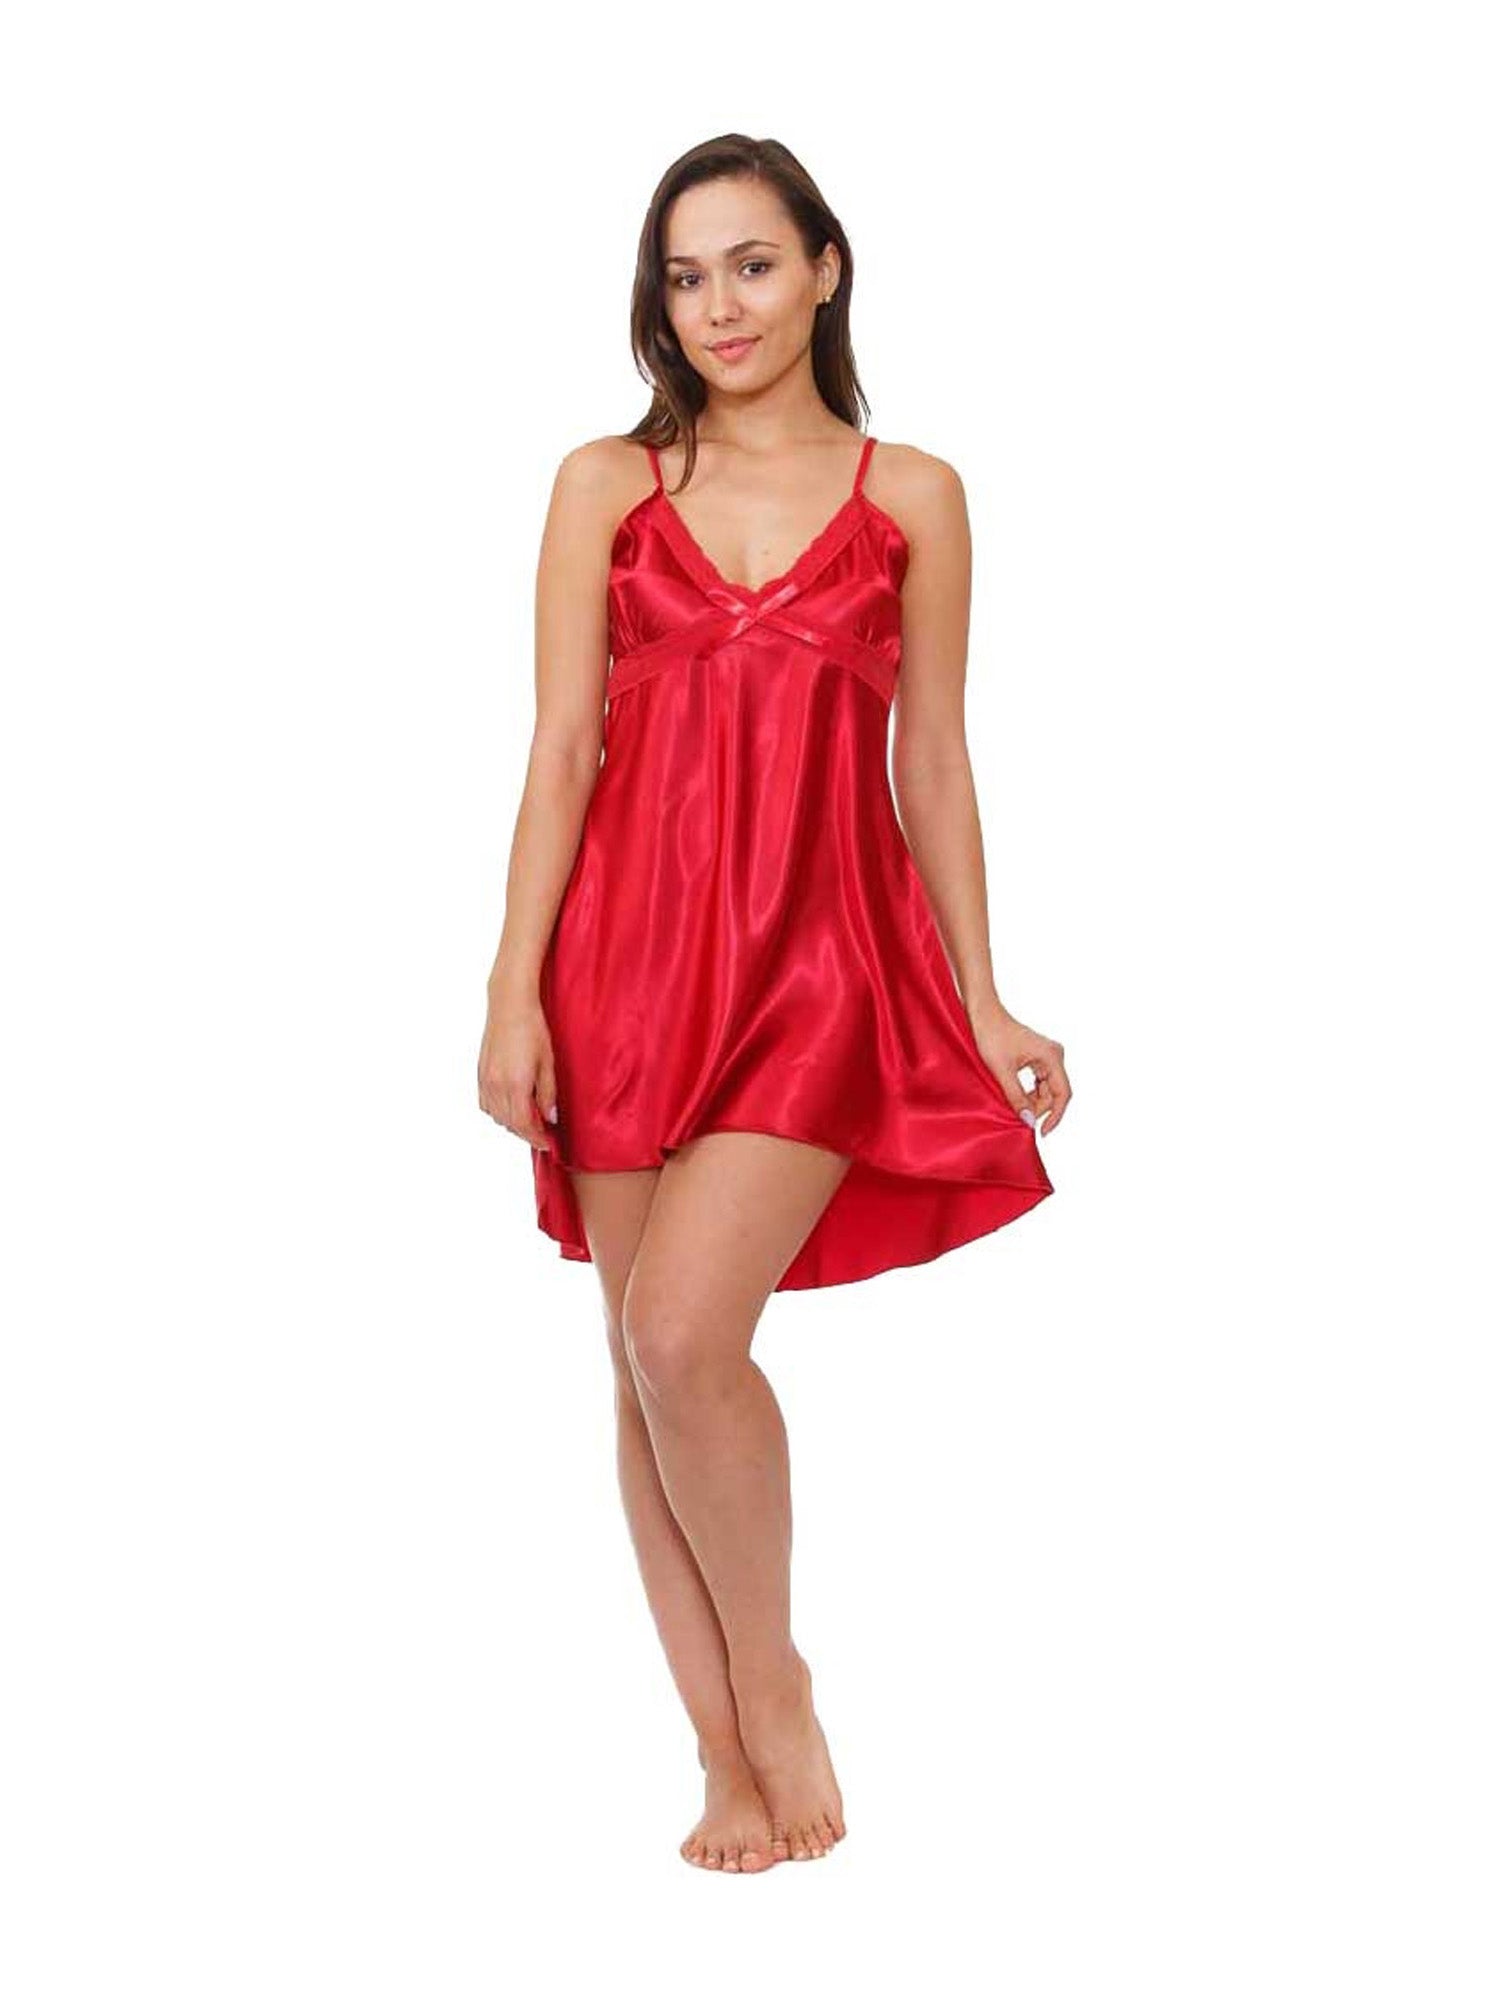 Women's Chemise, Satin, High-Low Style with Matching Lace and Bow